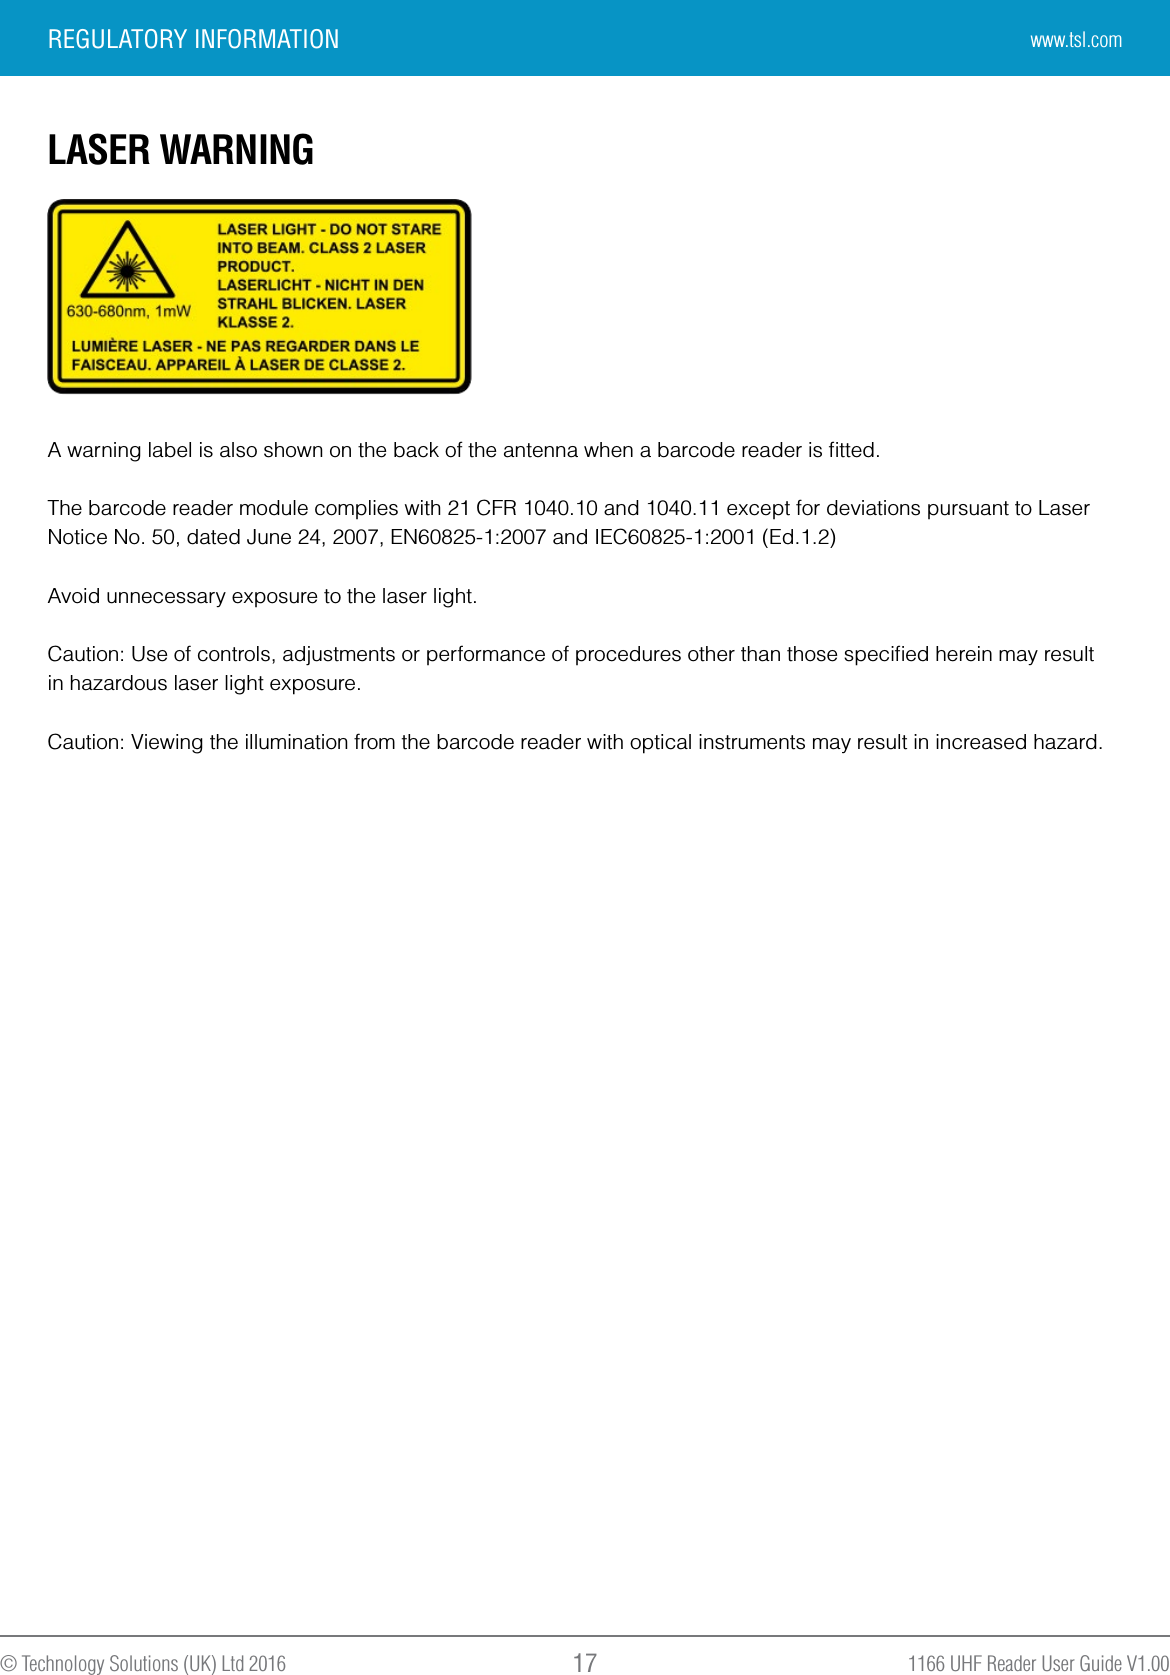 1166 UHF Reader User Guide V1.00© Technology Solutions (UK) Ltd 2016 17LASER WARNINGA warning label is also shown on the back of the antenna when a barcode reader is ﬁtted.The barcode reader module complies with 21 CFR 1040.10 and 1040.11 except for deviations pursuant to LaserNotice No. 50, dated June 24, 2007, EN60825-1:2007 and IEC60825-1:2001 (Ed.1.2)Avoid unnecessary exposure to the laser light.Caution: Use of controls, adjustments or performance of procedures other than those speciﬁed herein may resultin hazardous laser light exposure.Caution: Viewing the illumination from the barcode reader with optical instruments may result in increased hazard.REGULATORY INFORMATION www.tsl.com